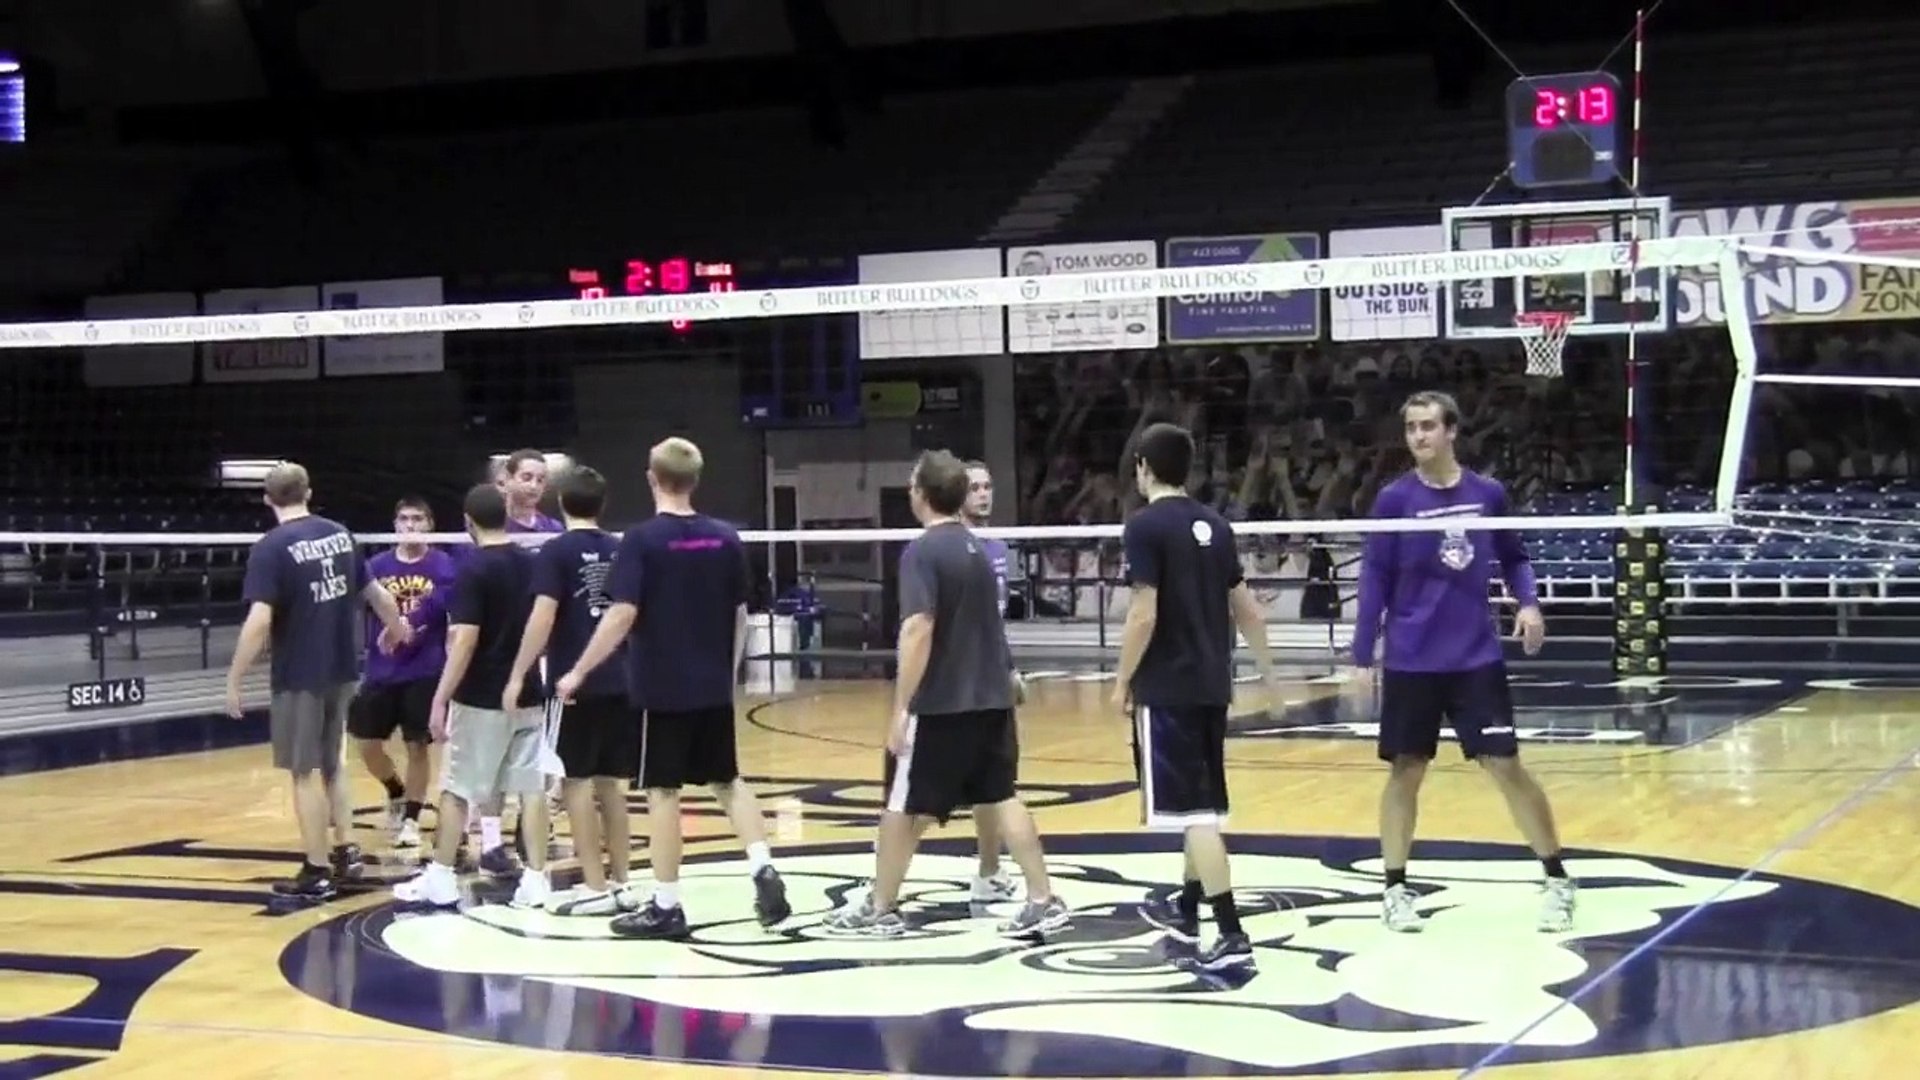 Intramural Volleyball Championships 2012